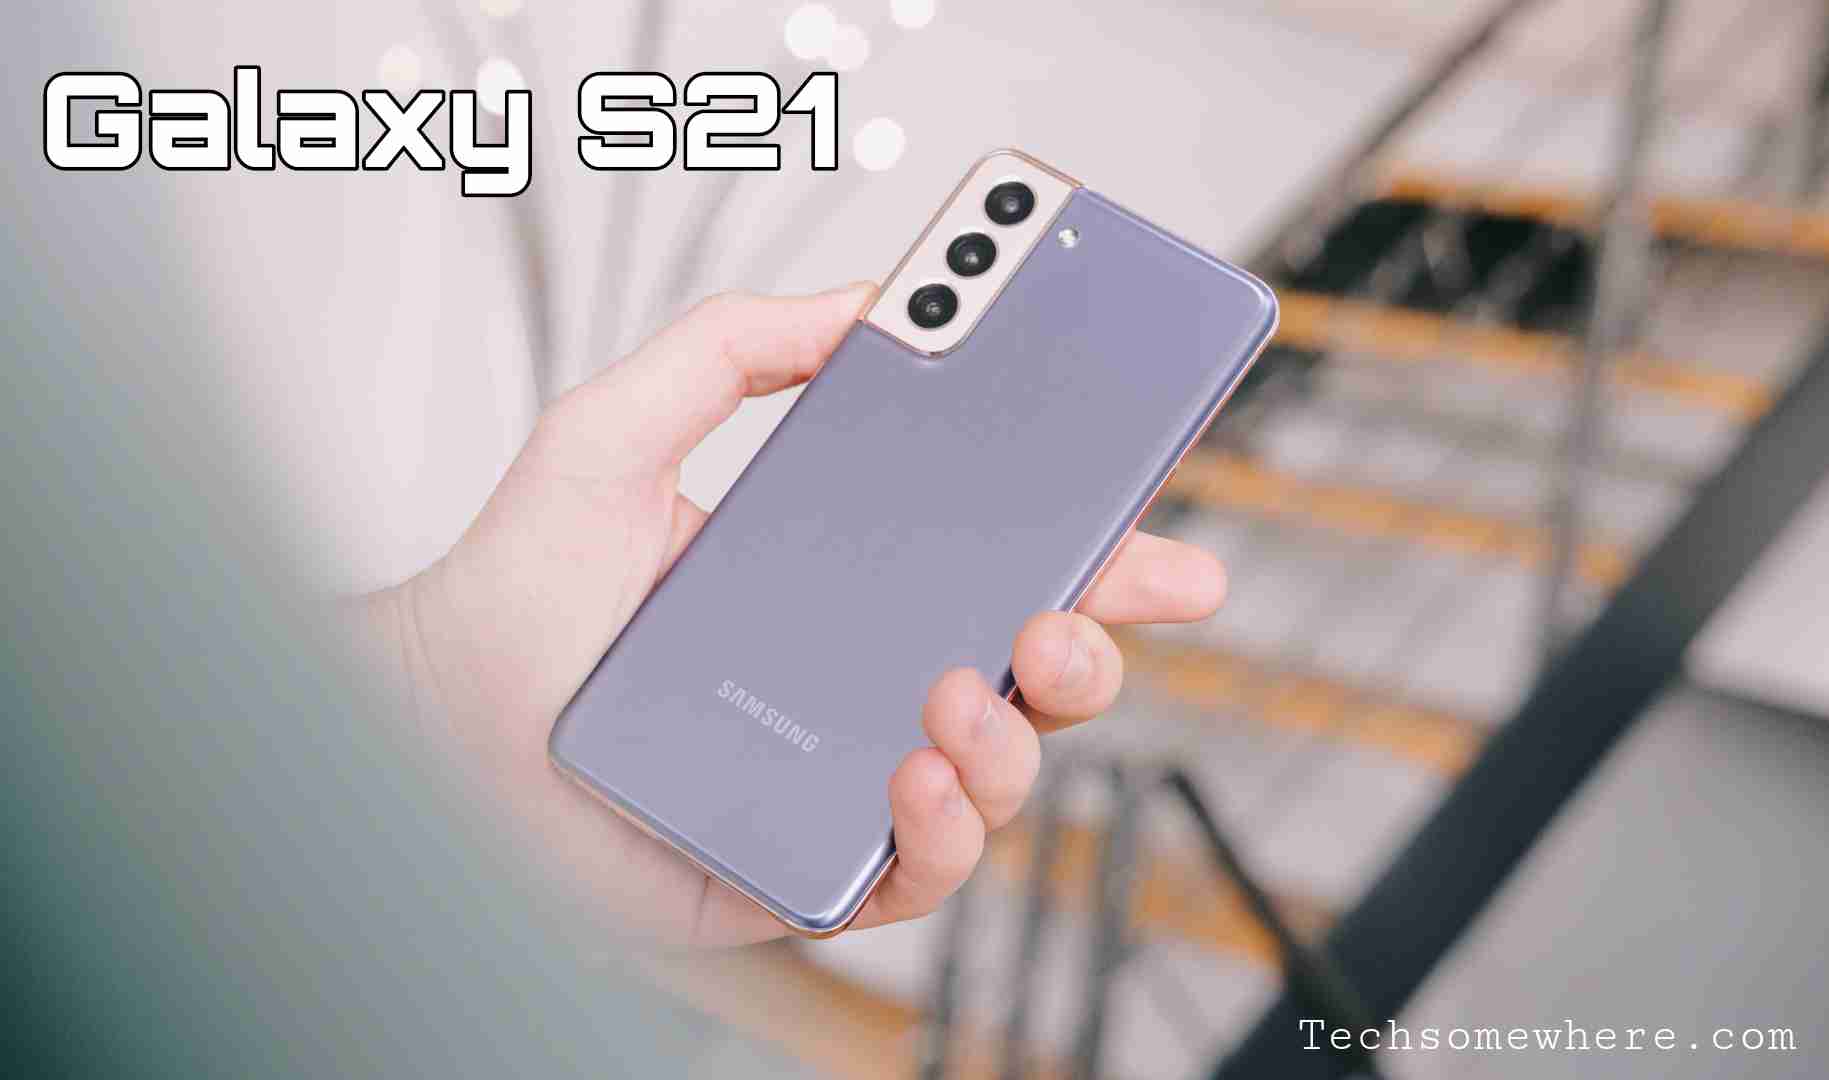 Amazing Samsung Galaxy S21 Specification, Price & Release Date!